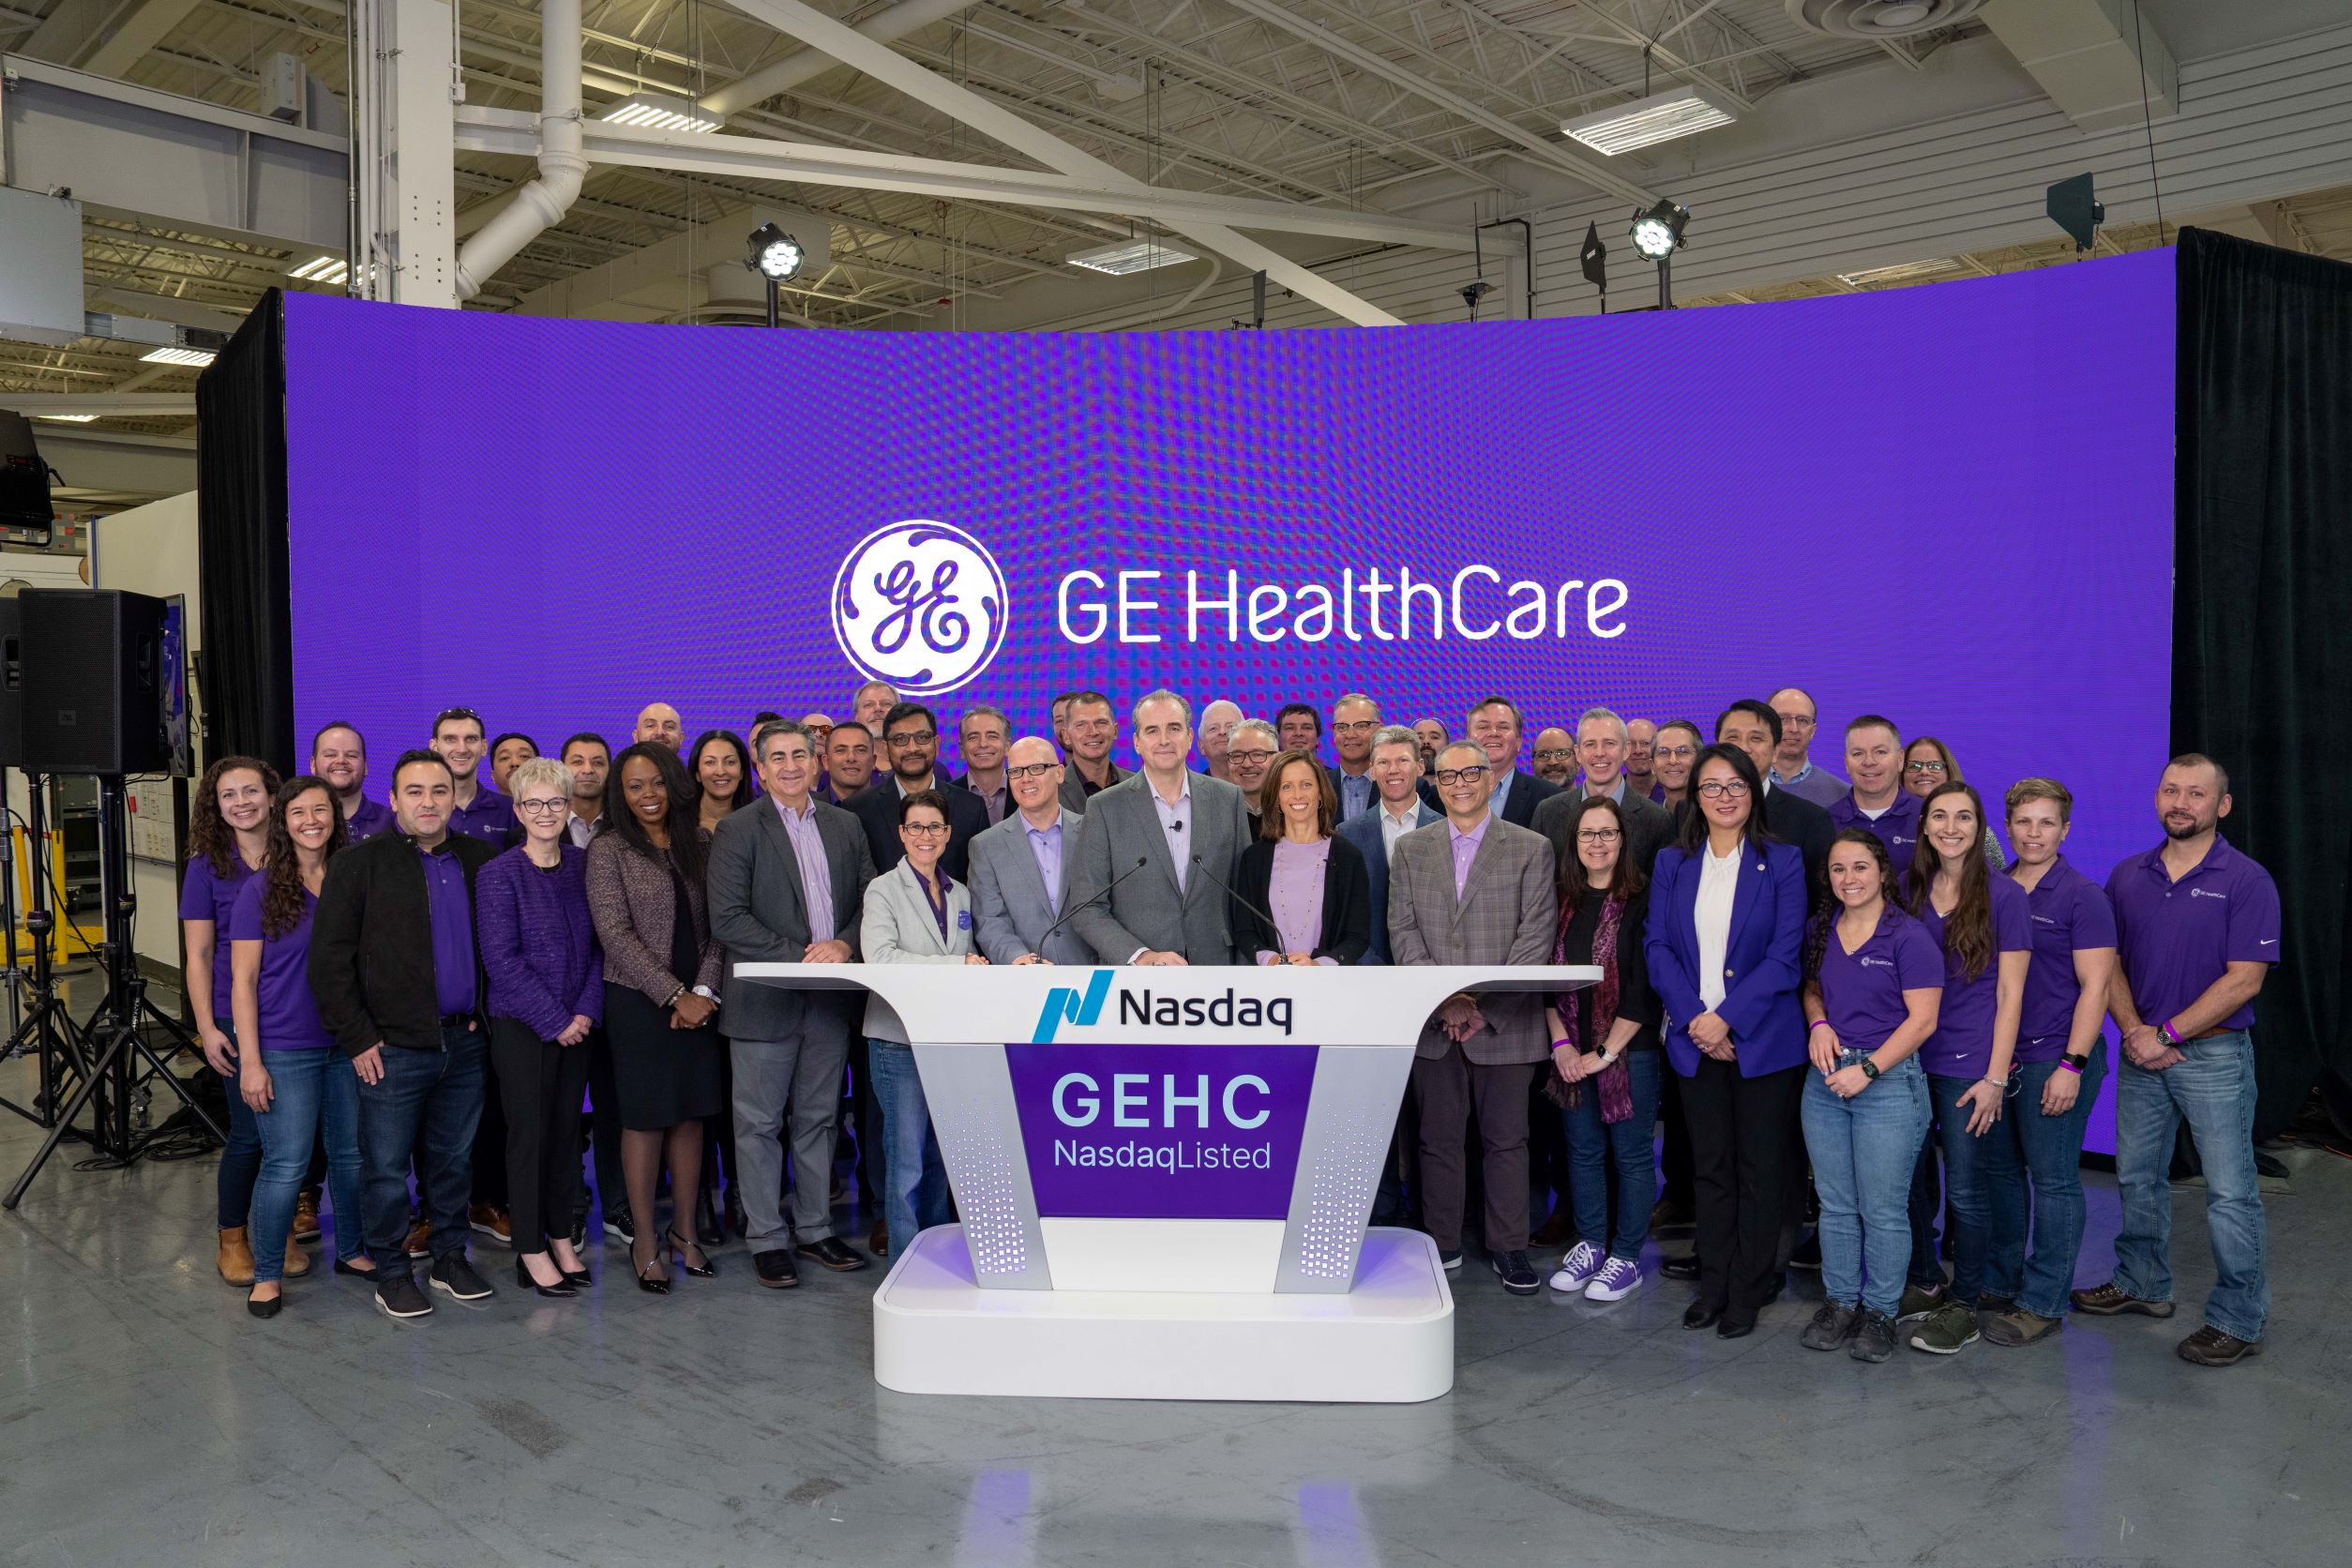 GE HealthCare spinout